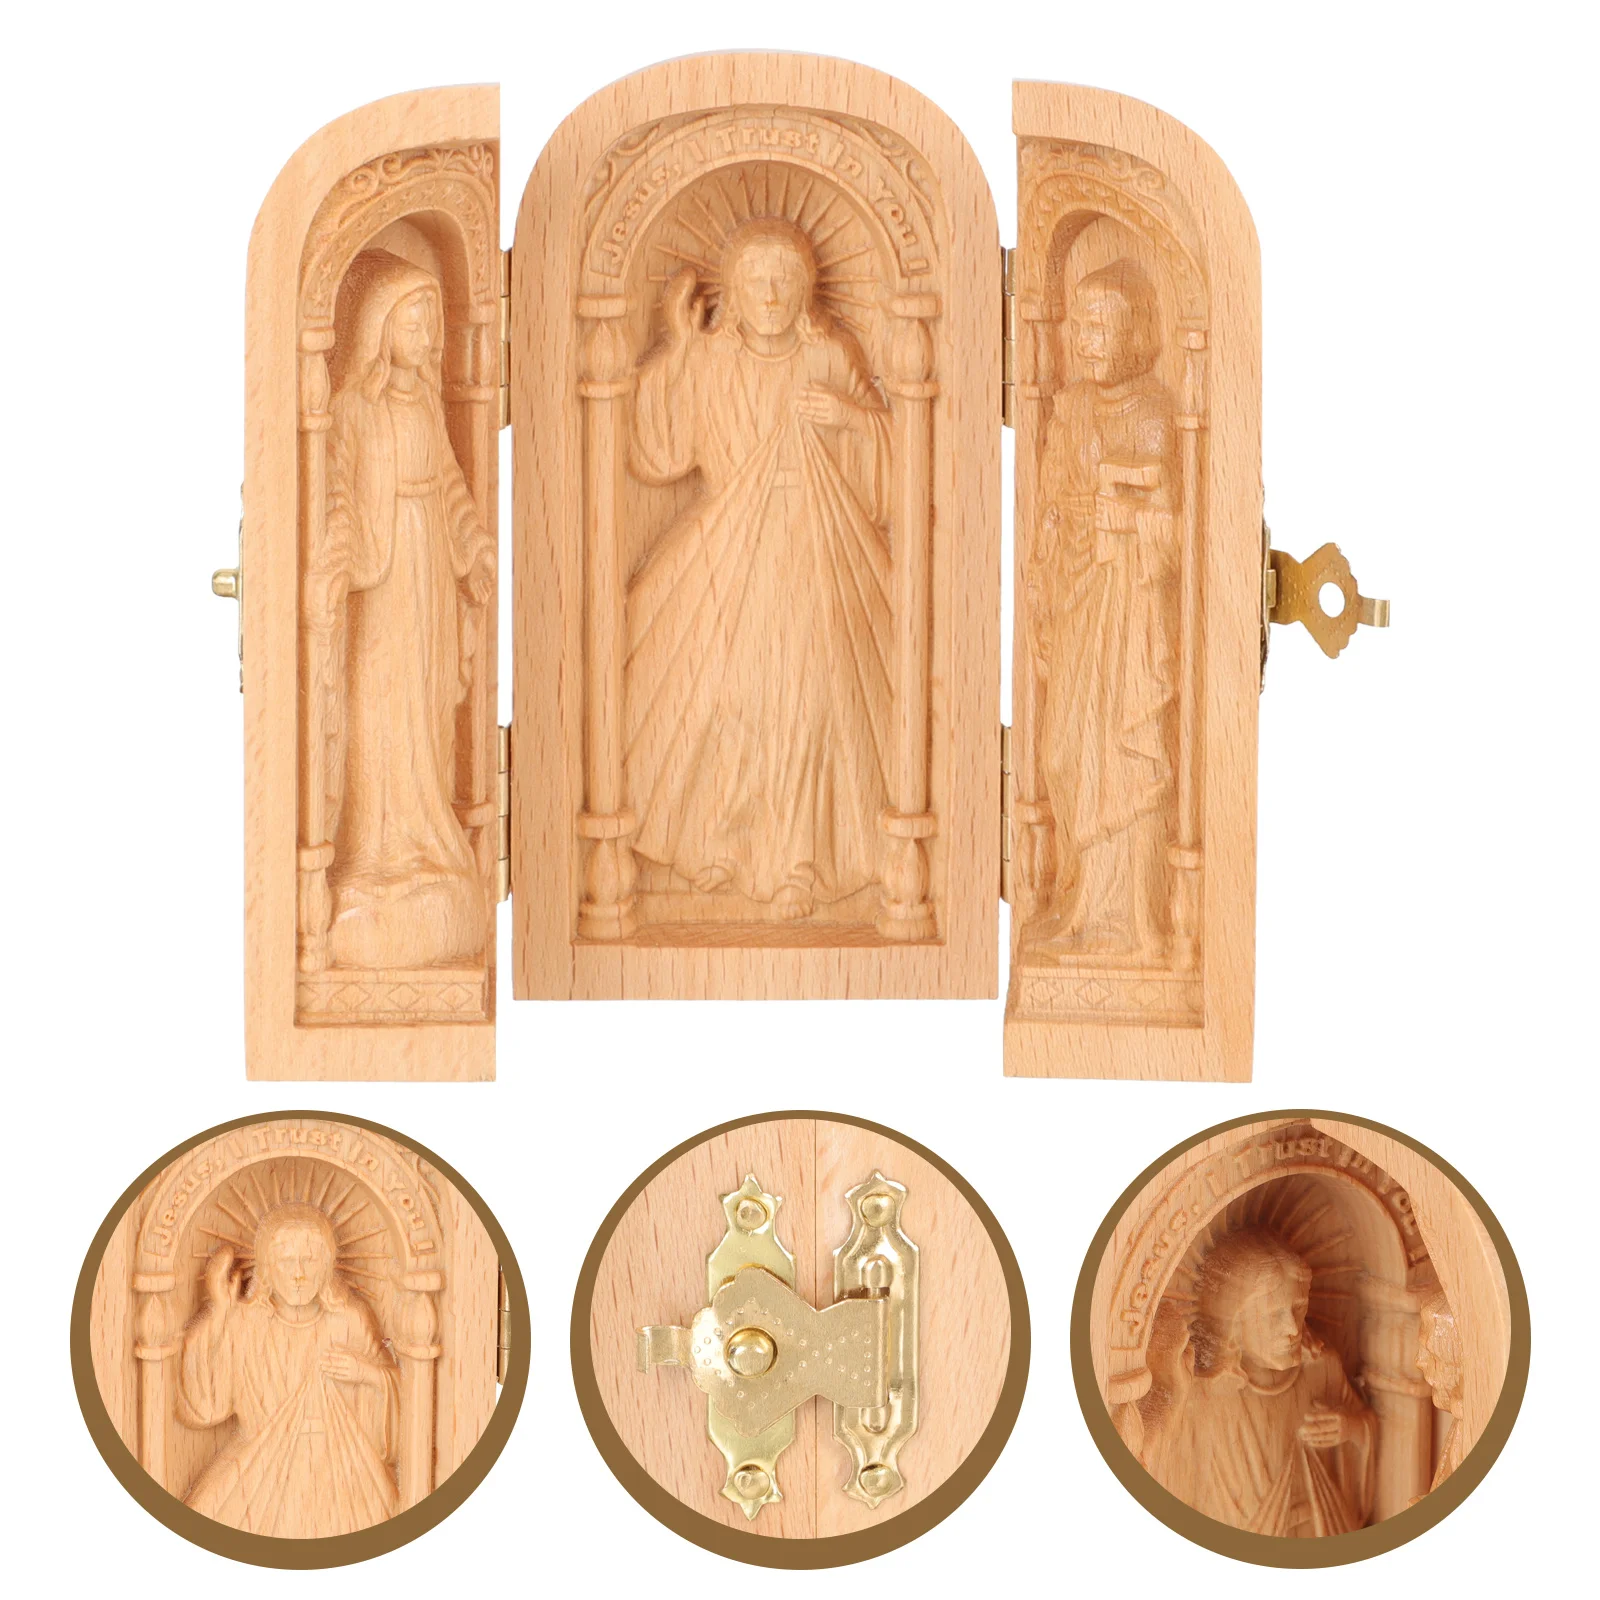 

Religious Ornaments Wood Craft Figurine Home Accents Decor Catholic Statues Small Office Desk Decorations Outdoor